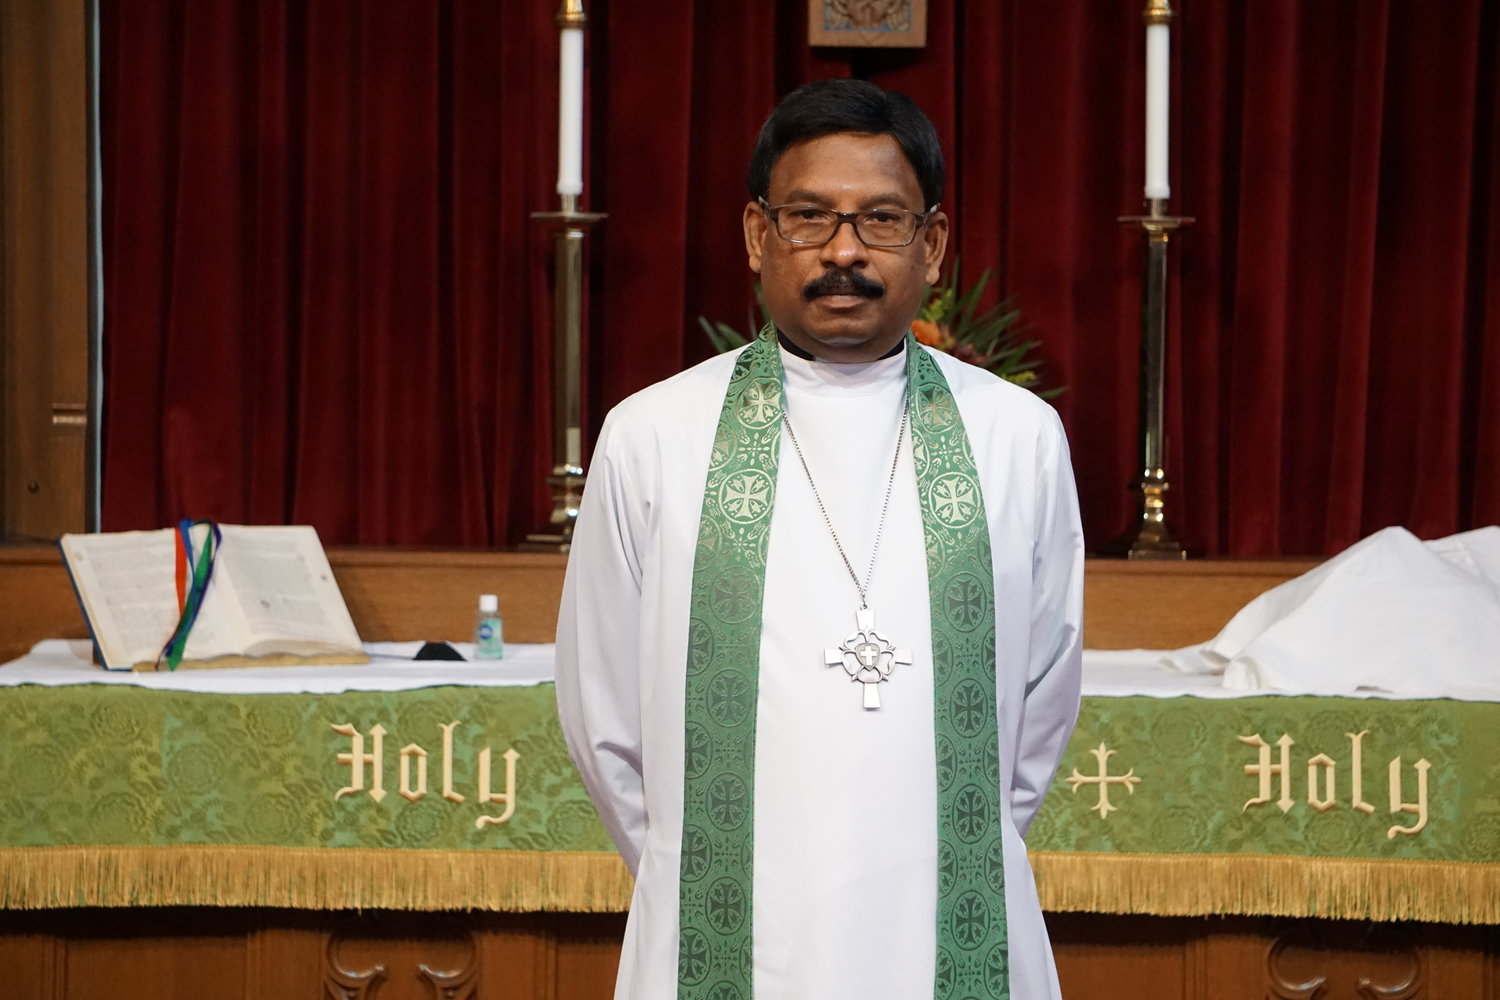 The 55-year-old Thiagarajan, who was born in India, will become church’s new spiritual leader on Saturday.